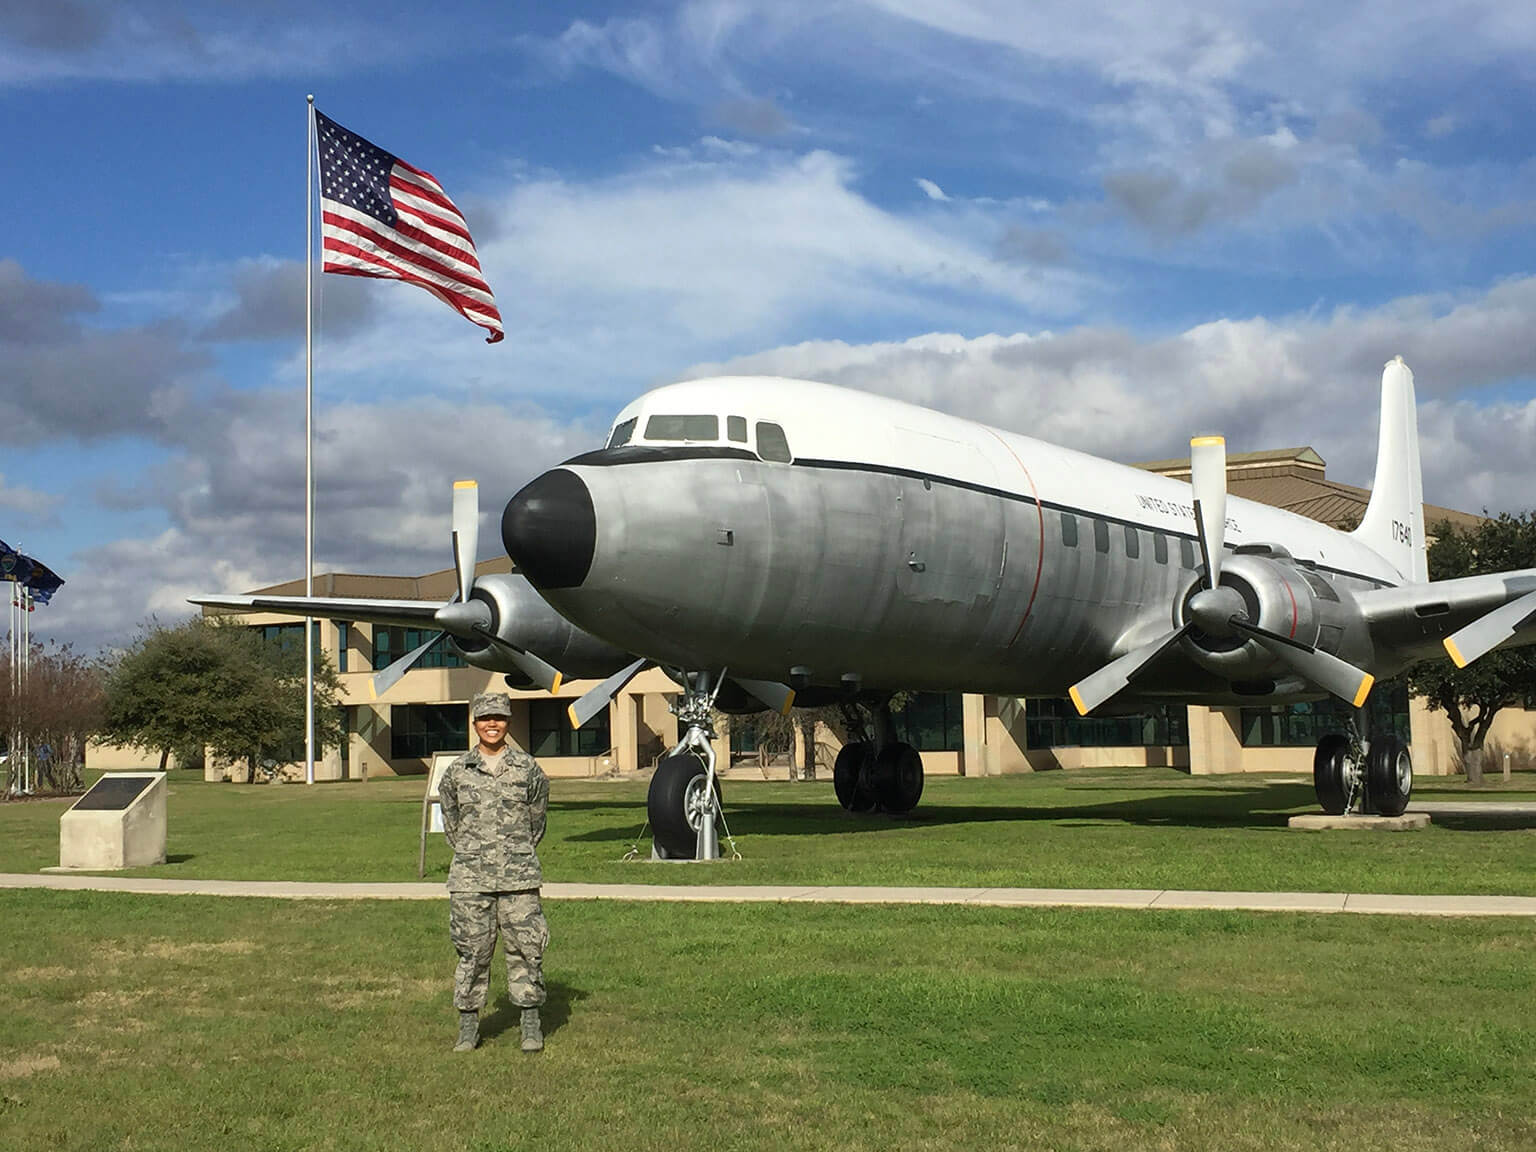 Cadet 1st Class Kiana Baruela pictured here as an Airman first class at Joint Base San Antonio-Lackland, Texas